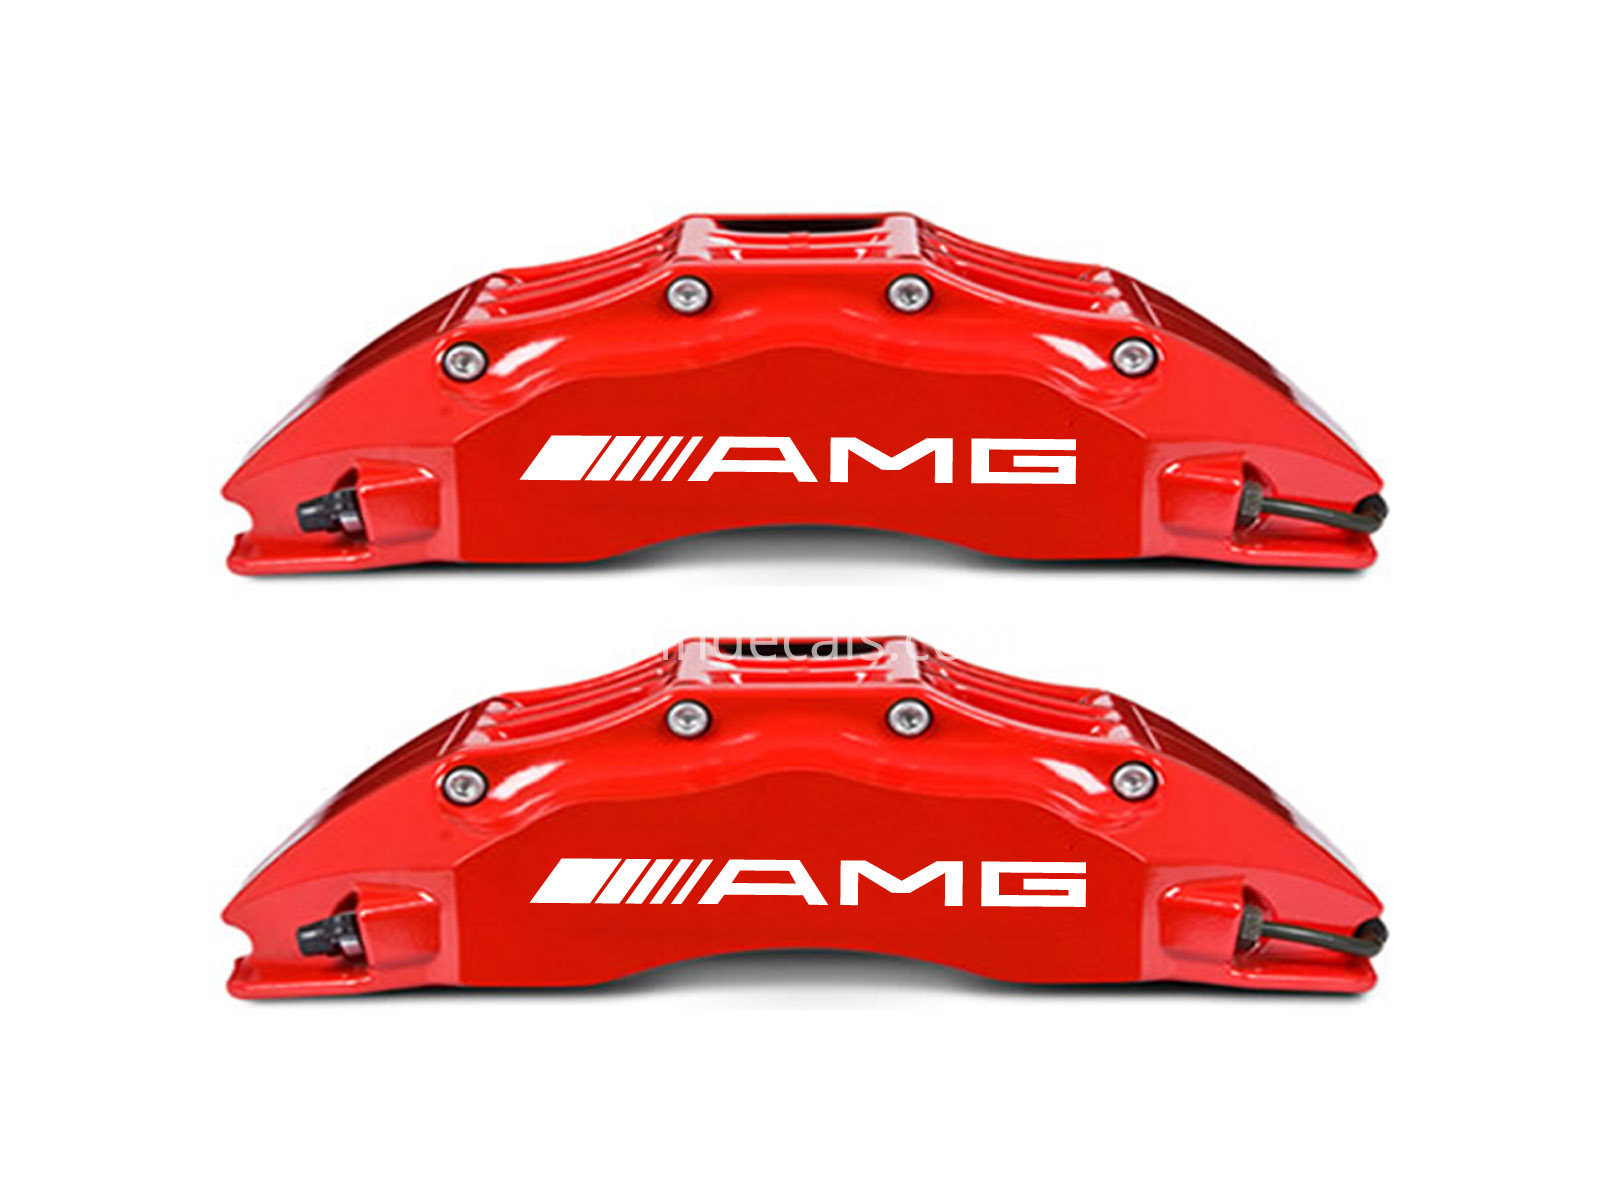 6 x AMG Stickers for Brakes - White